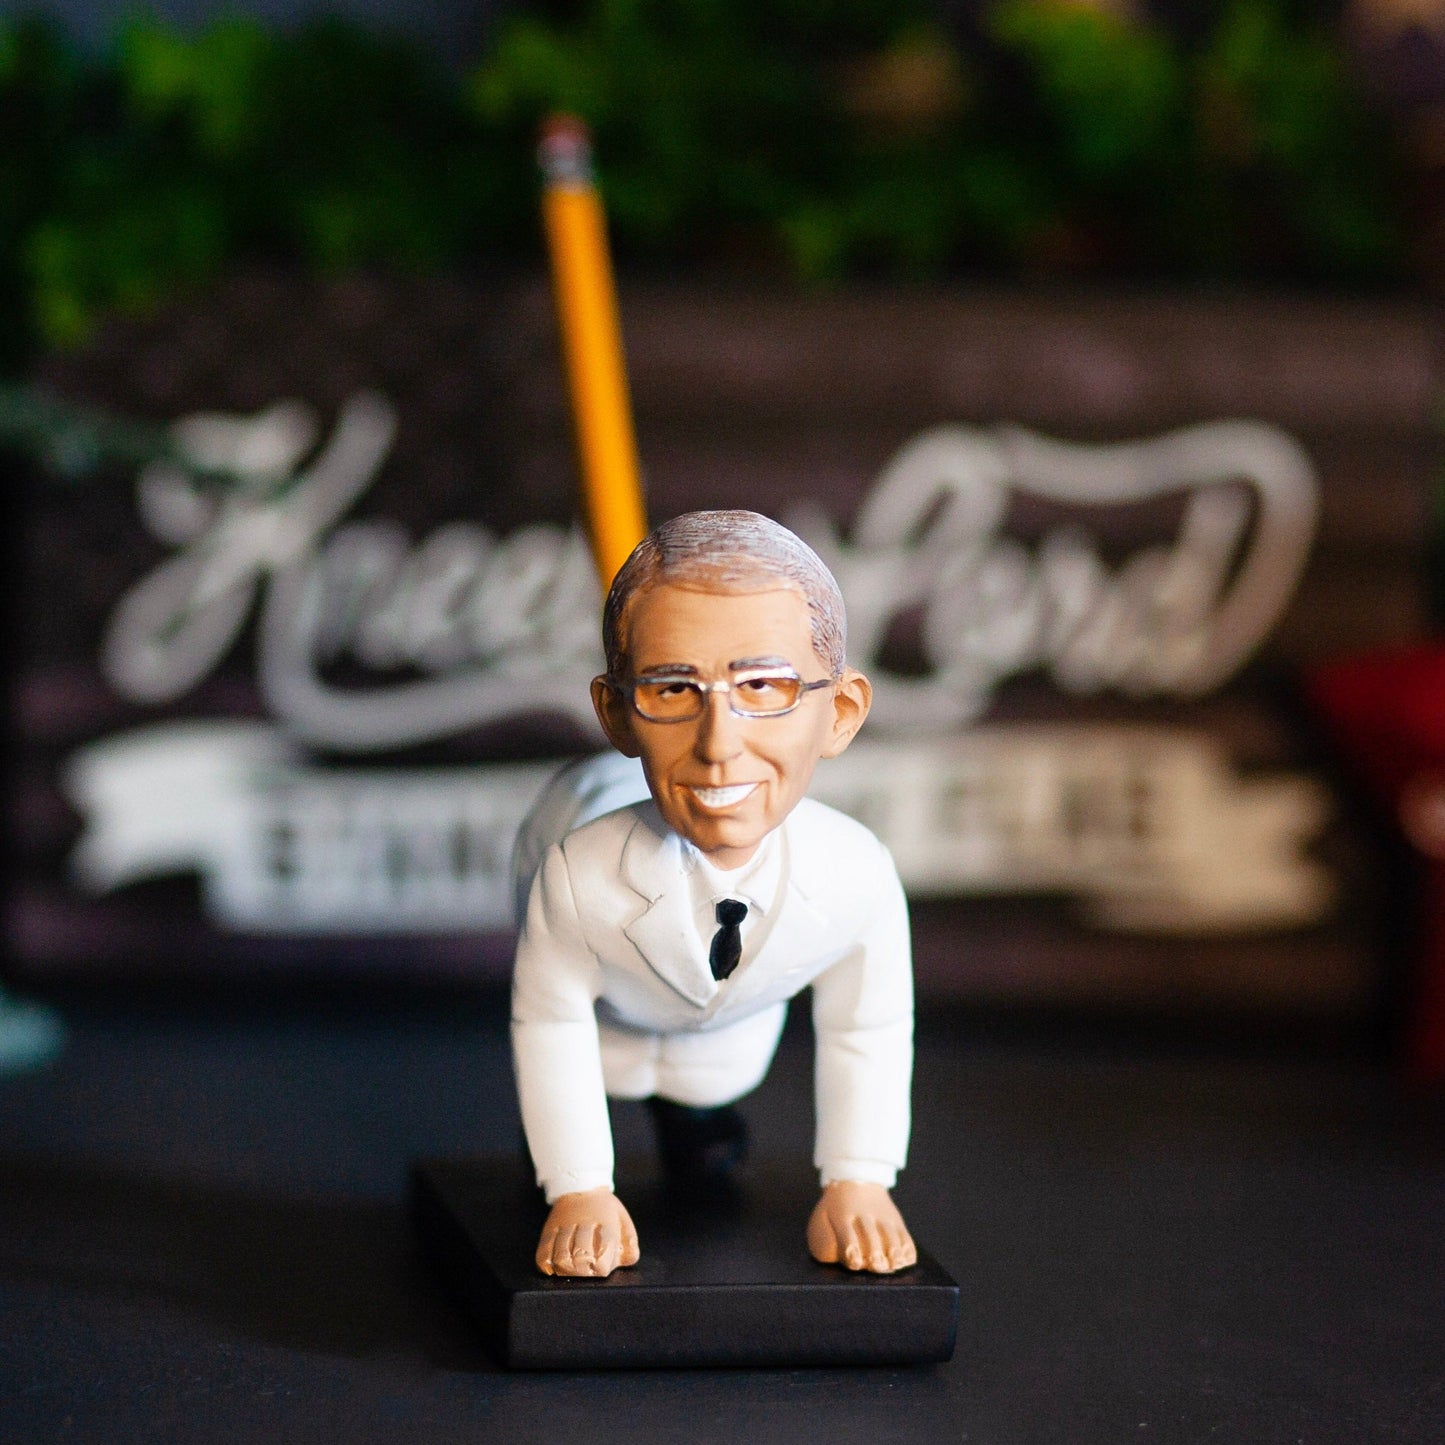 Dr. Fauci Funny Novelty Pencil Holder Bobble - 5 Pieces